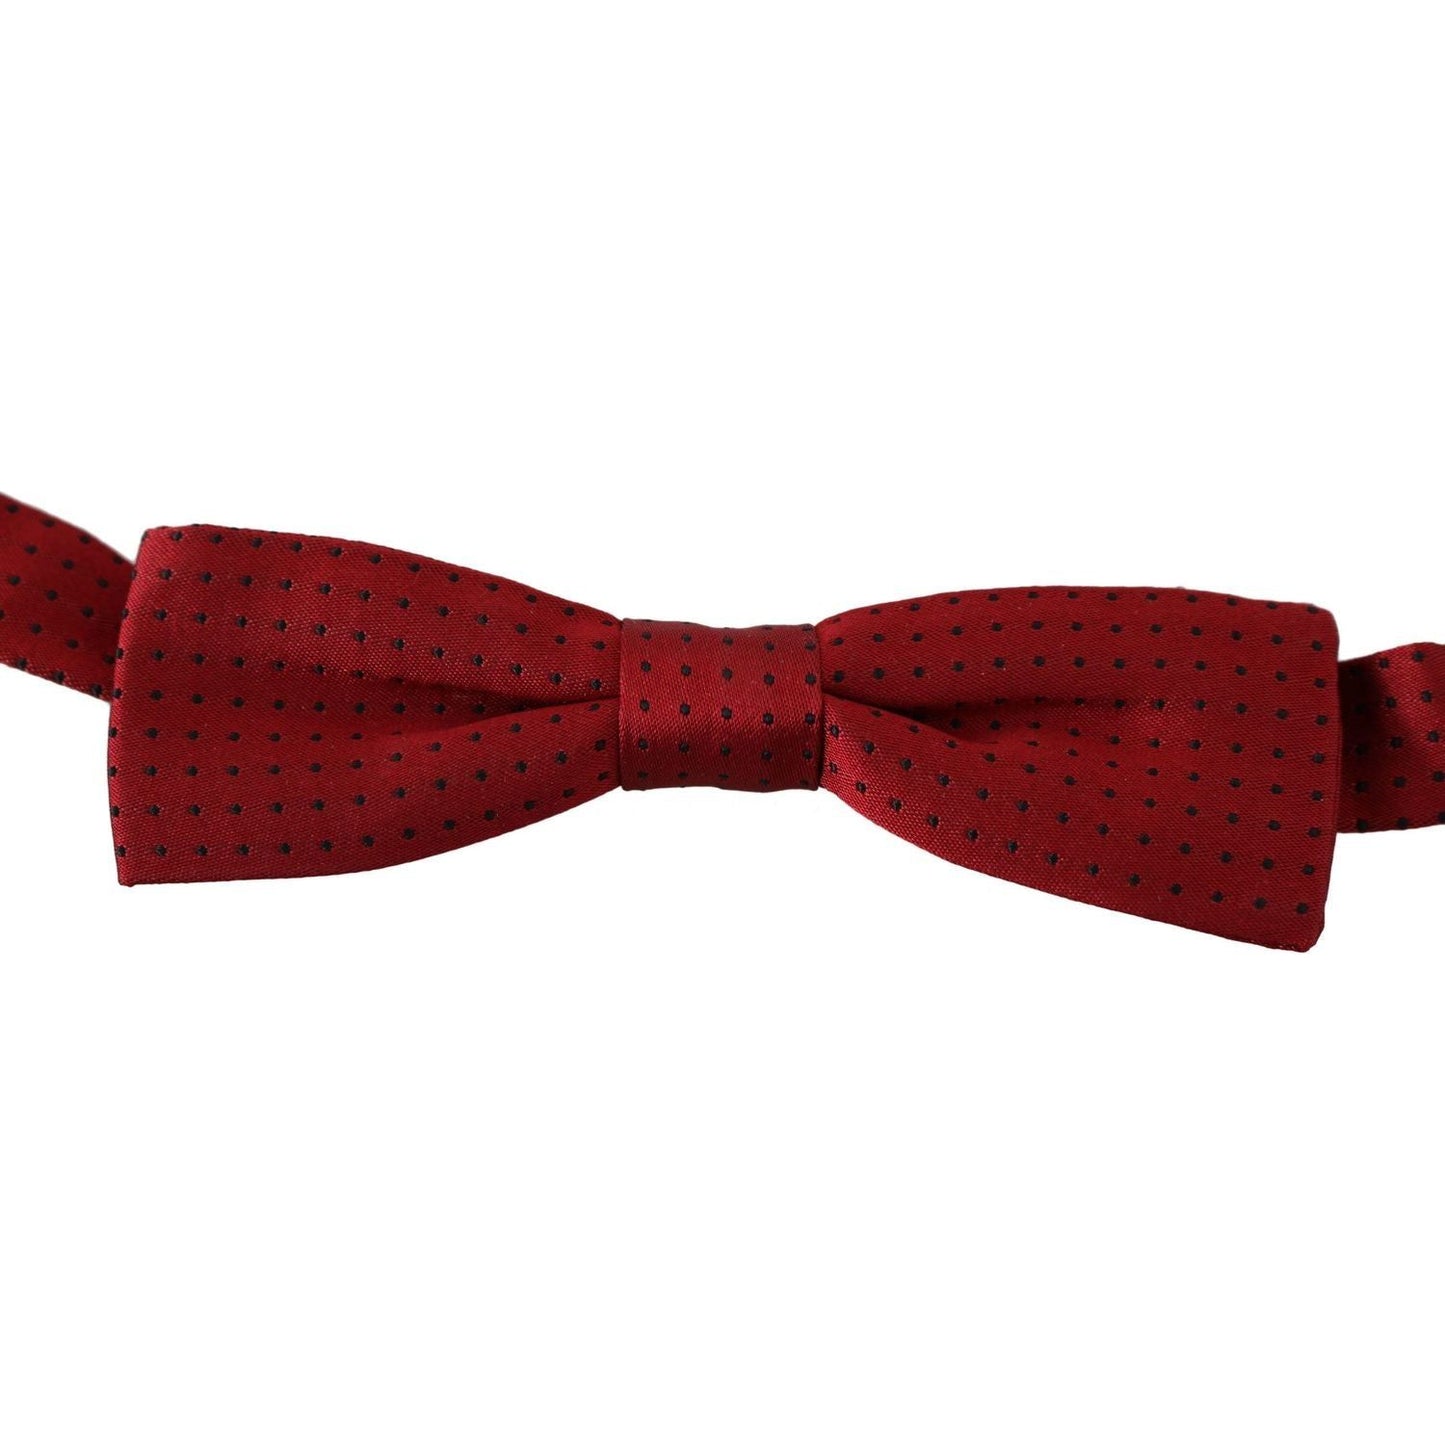 Dolce & Gabbana Elegant Red Dotted Silk Bow Tie Bow Tie red-dotted-silk-adjustable-neck-papillon-bow-tie